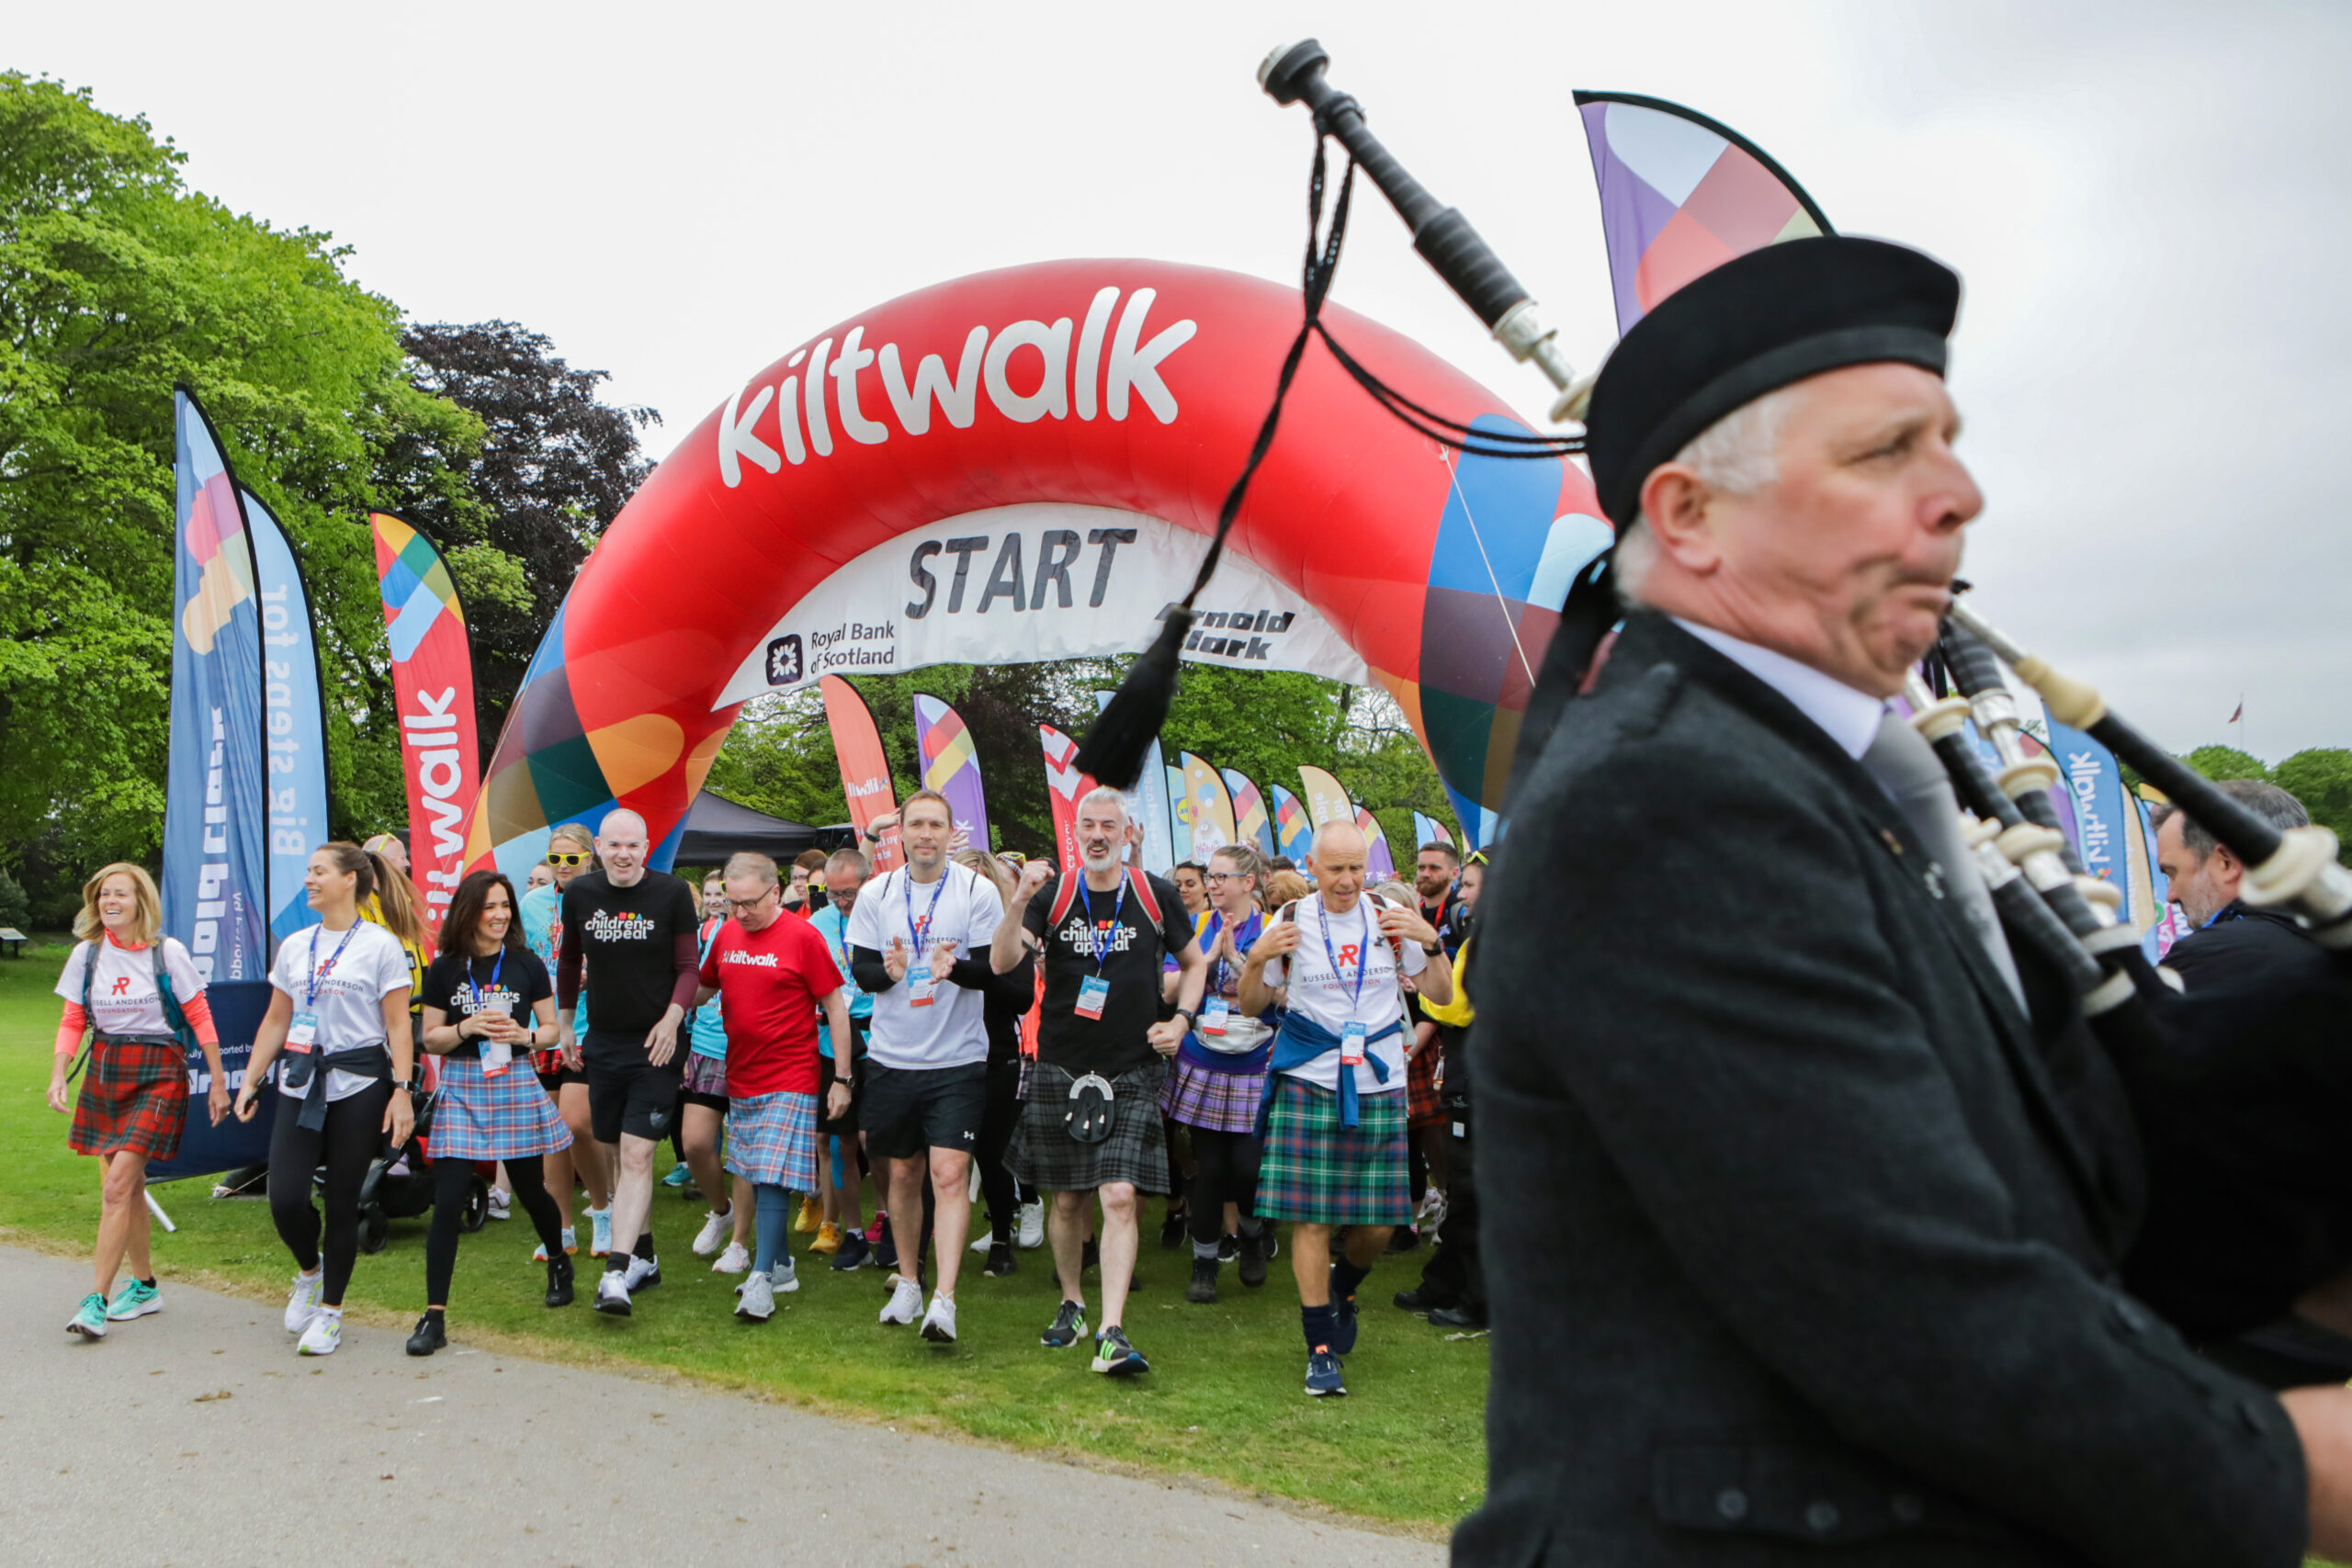 image of people at the Kiltwalk starting line, with a man playing the bagpipes in the foreground